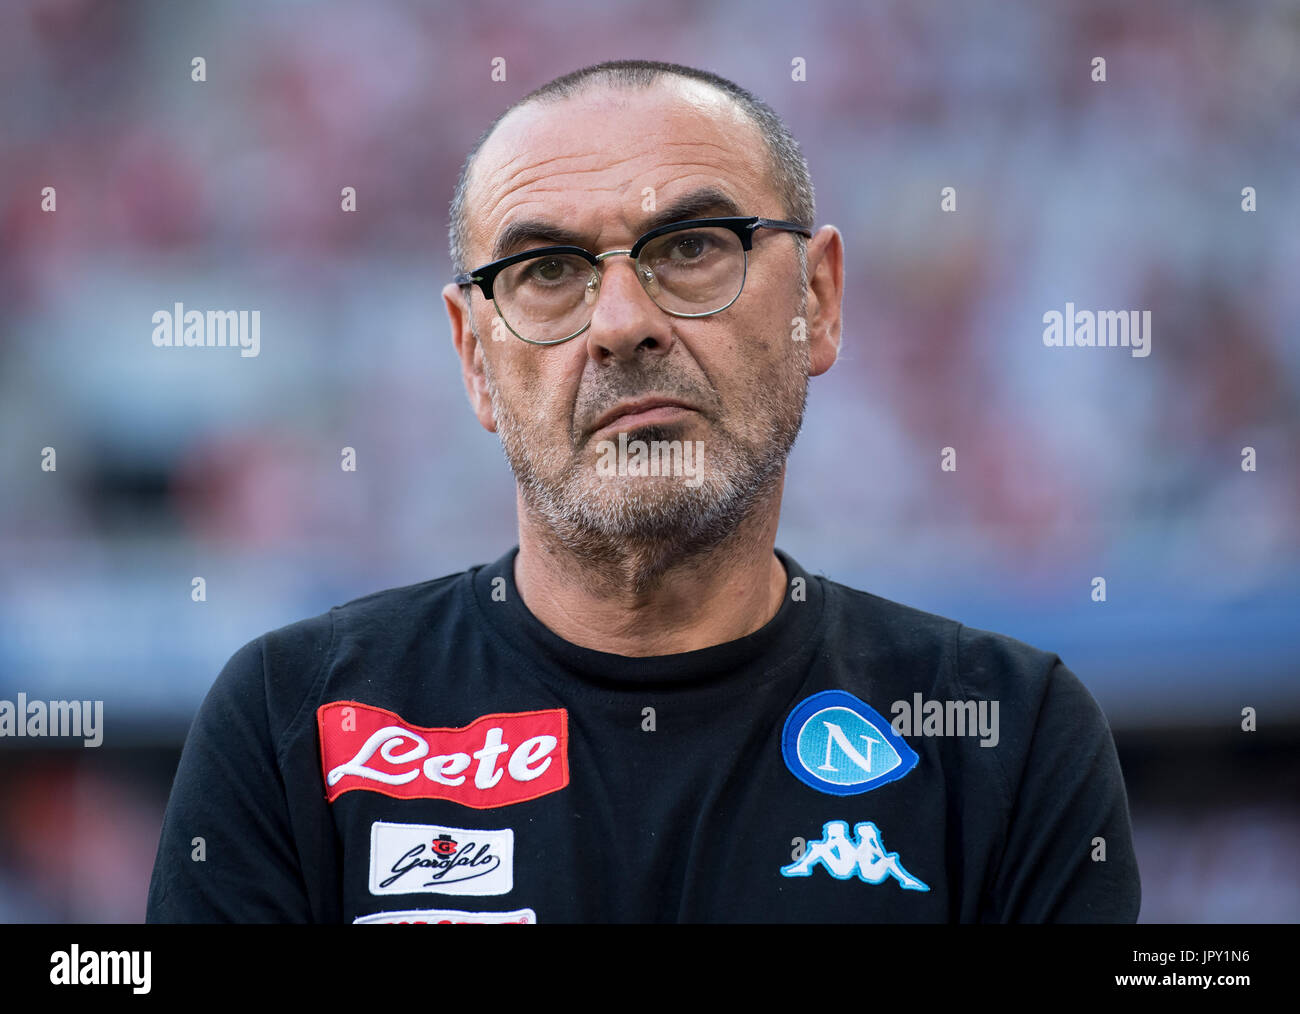 Munich, Germany. 2nd Aug, 2017. SSC Naples coach Maurizio Sarri enters the arena before the Audi Cup 3rd place SSC Naples vs Bayern Munich match at the Allianz Arena in Munich, Germany, 2 August, 2017. Photo: Sven Hoppe/dpa/Alamy Live News Stock Photo